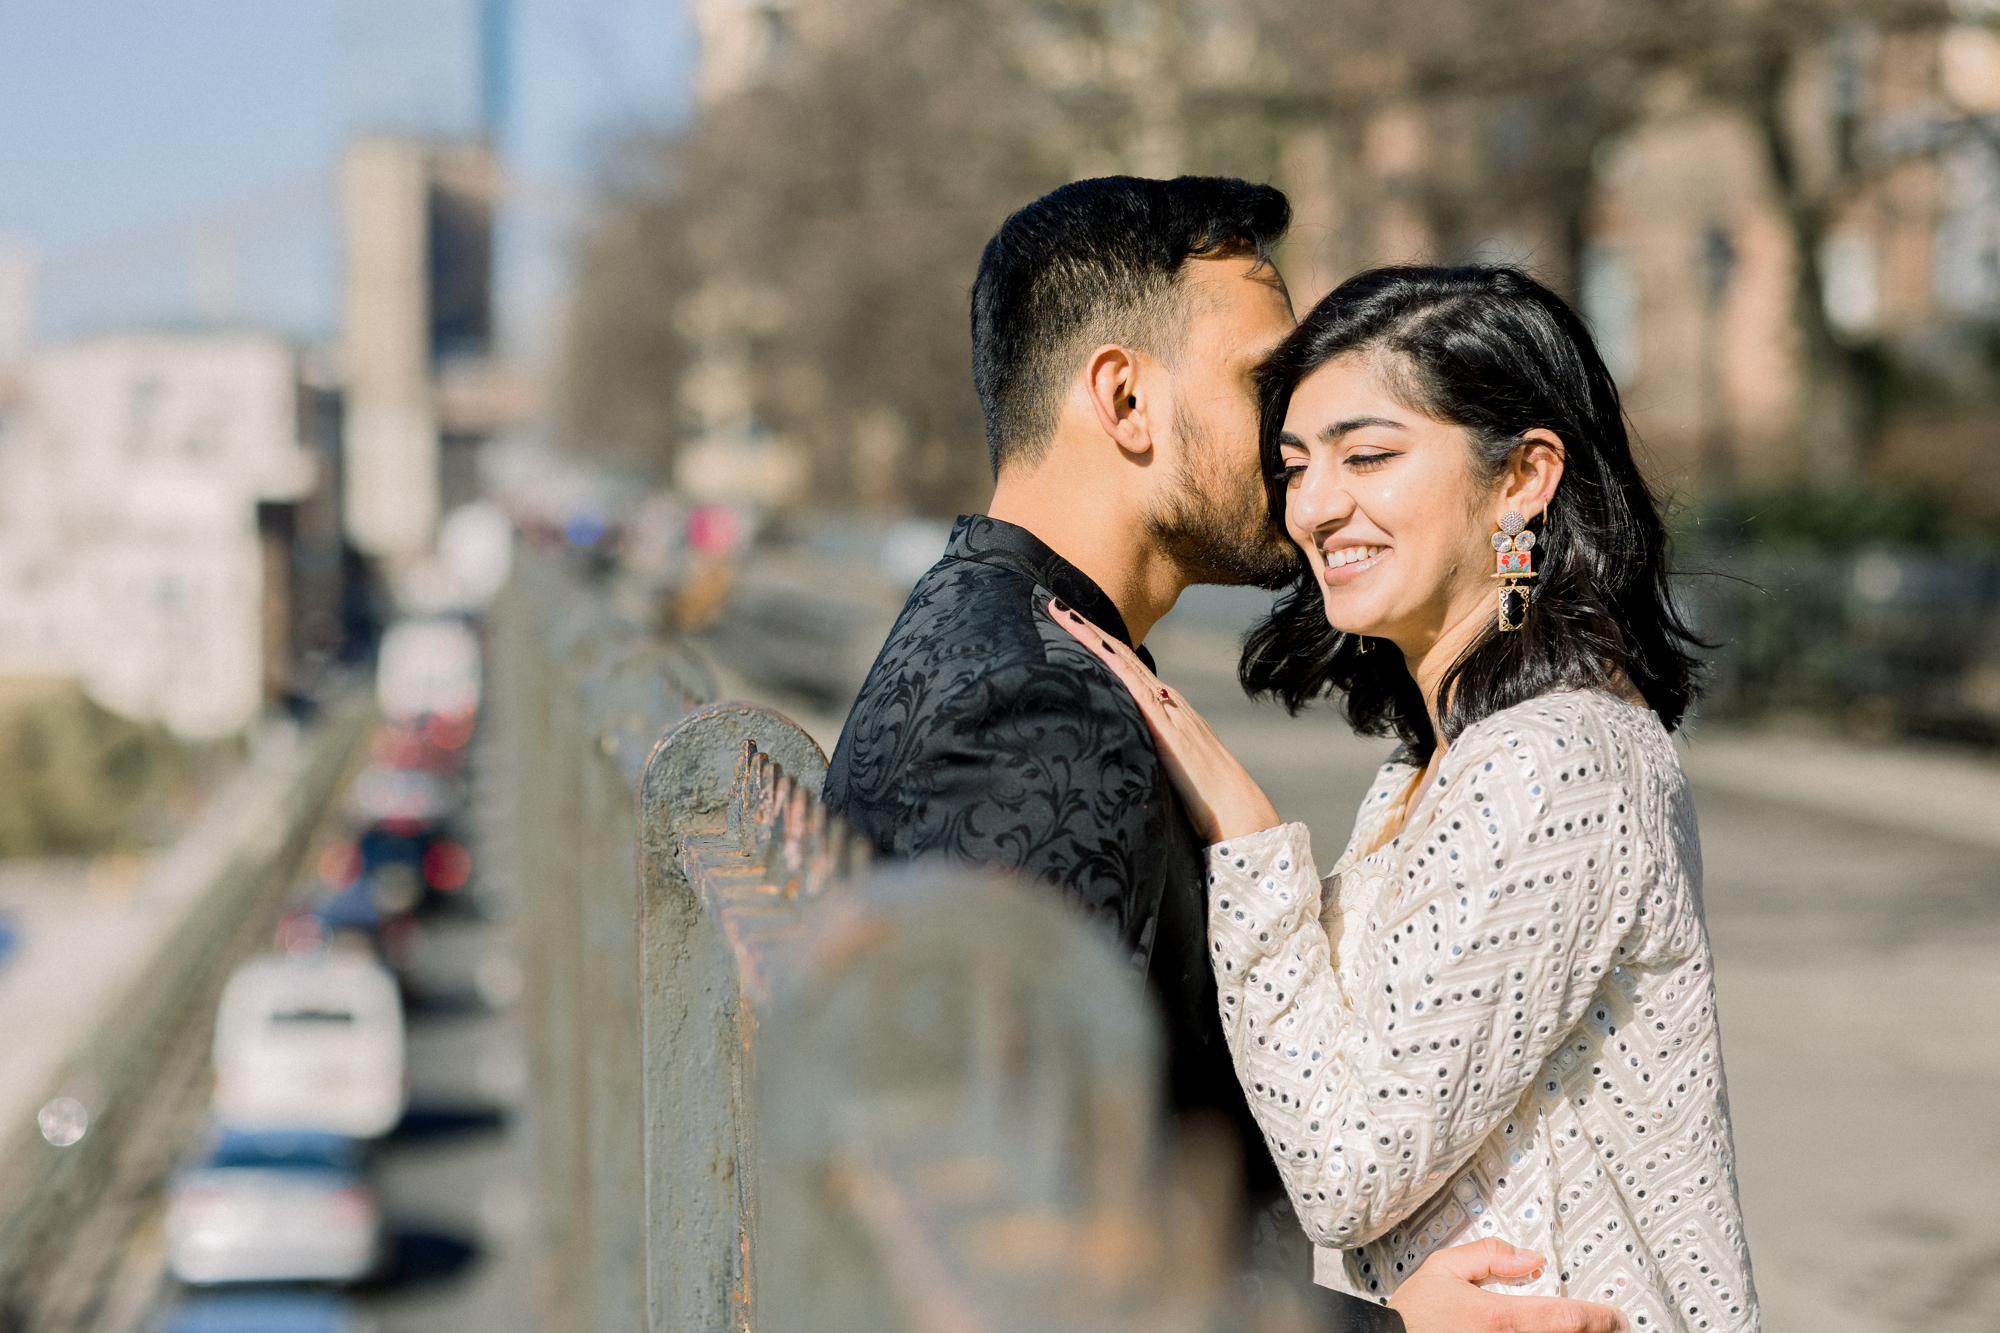 Magical and Wintery Brooklyn Heights Promenade Engagement Photos